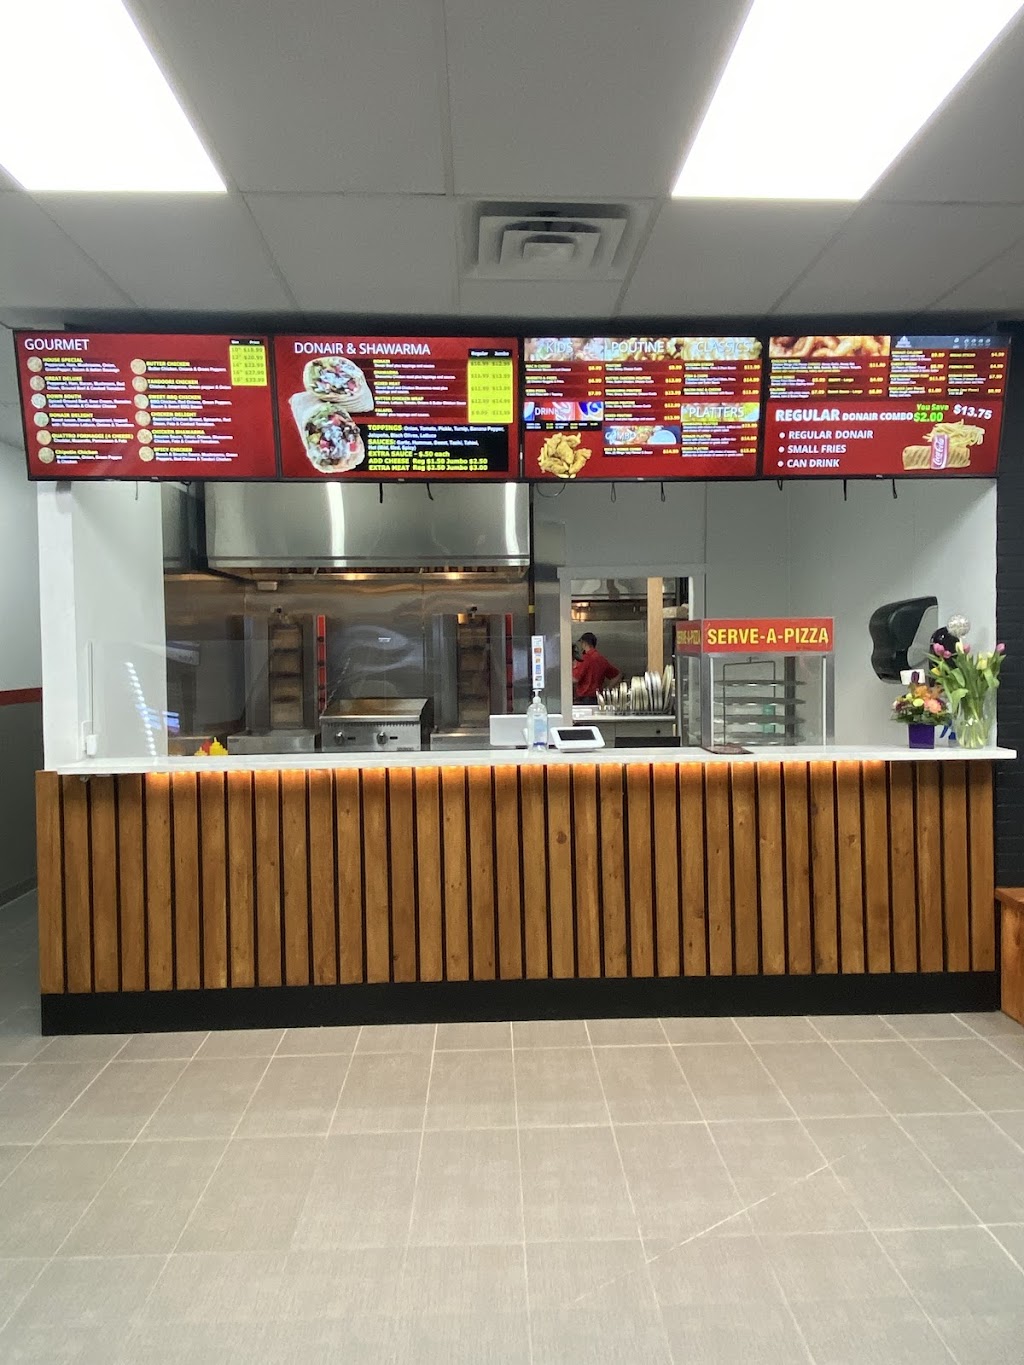 High River Donair and Pizza | 1103 18 St SE D, High River, AB T1V 2A9, Canada | Phone: (403) 649-1110